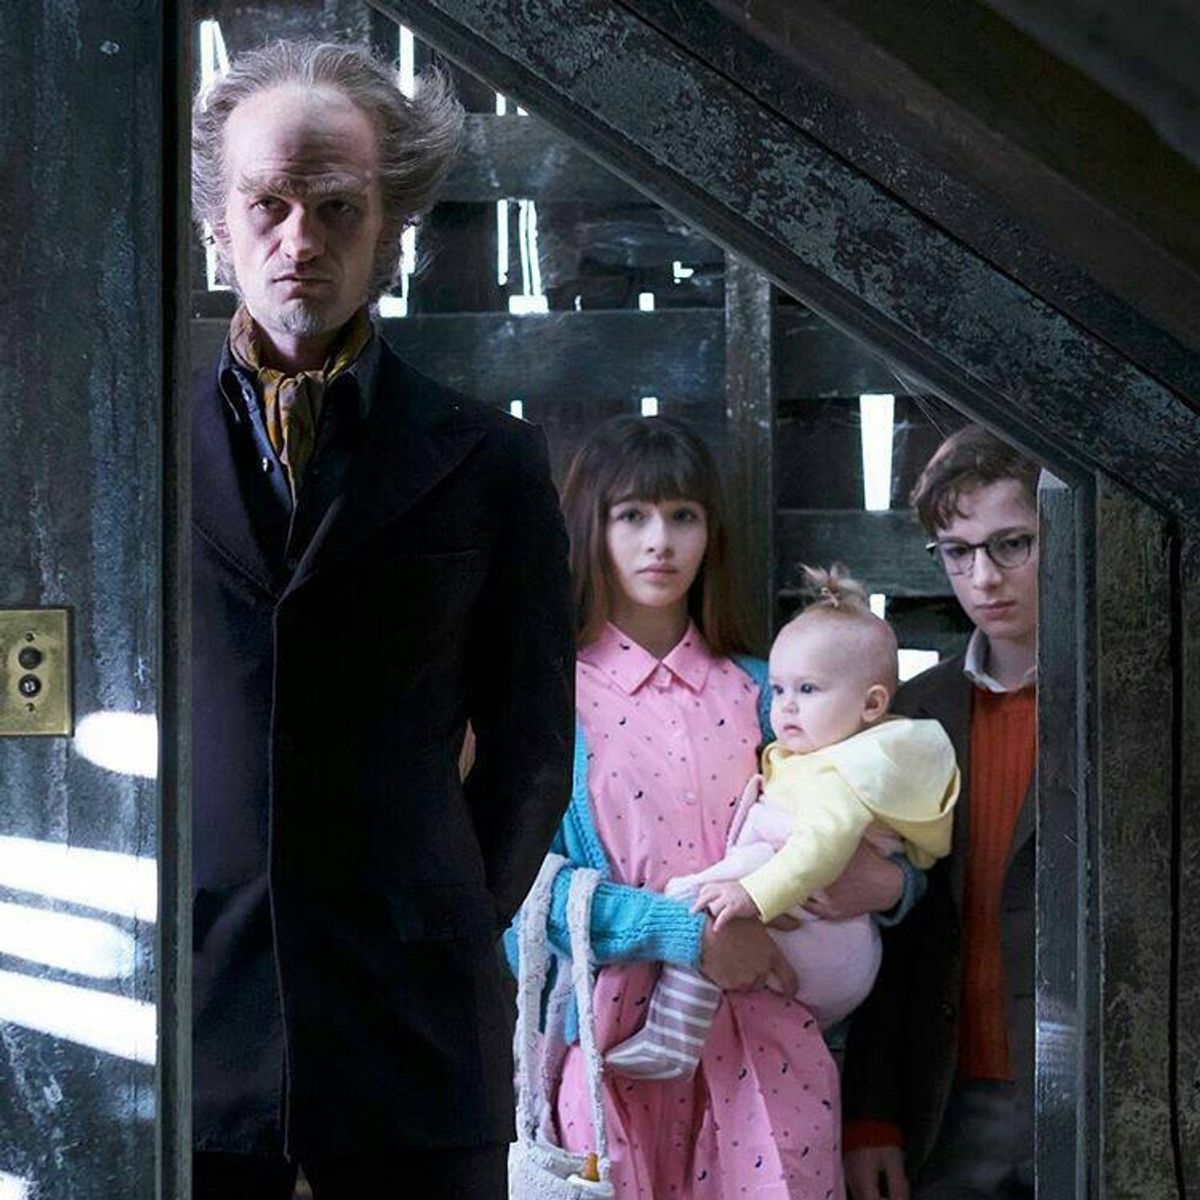 A Review Of Netflix's "A Series Of Unfortunate Events"